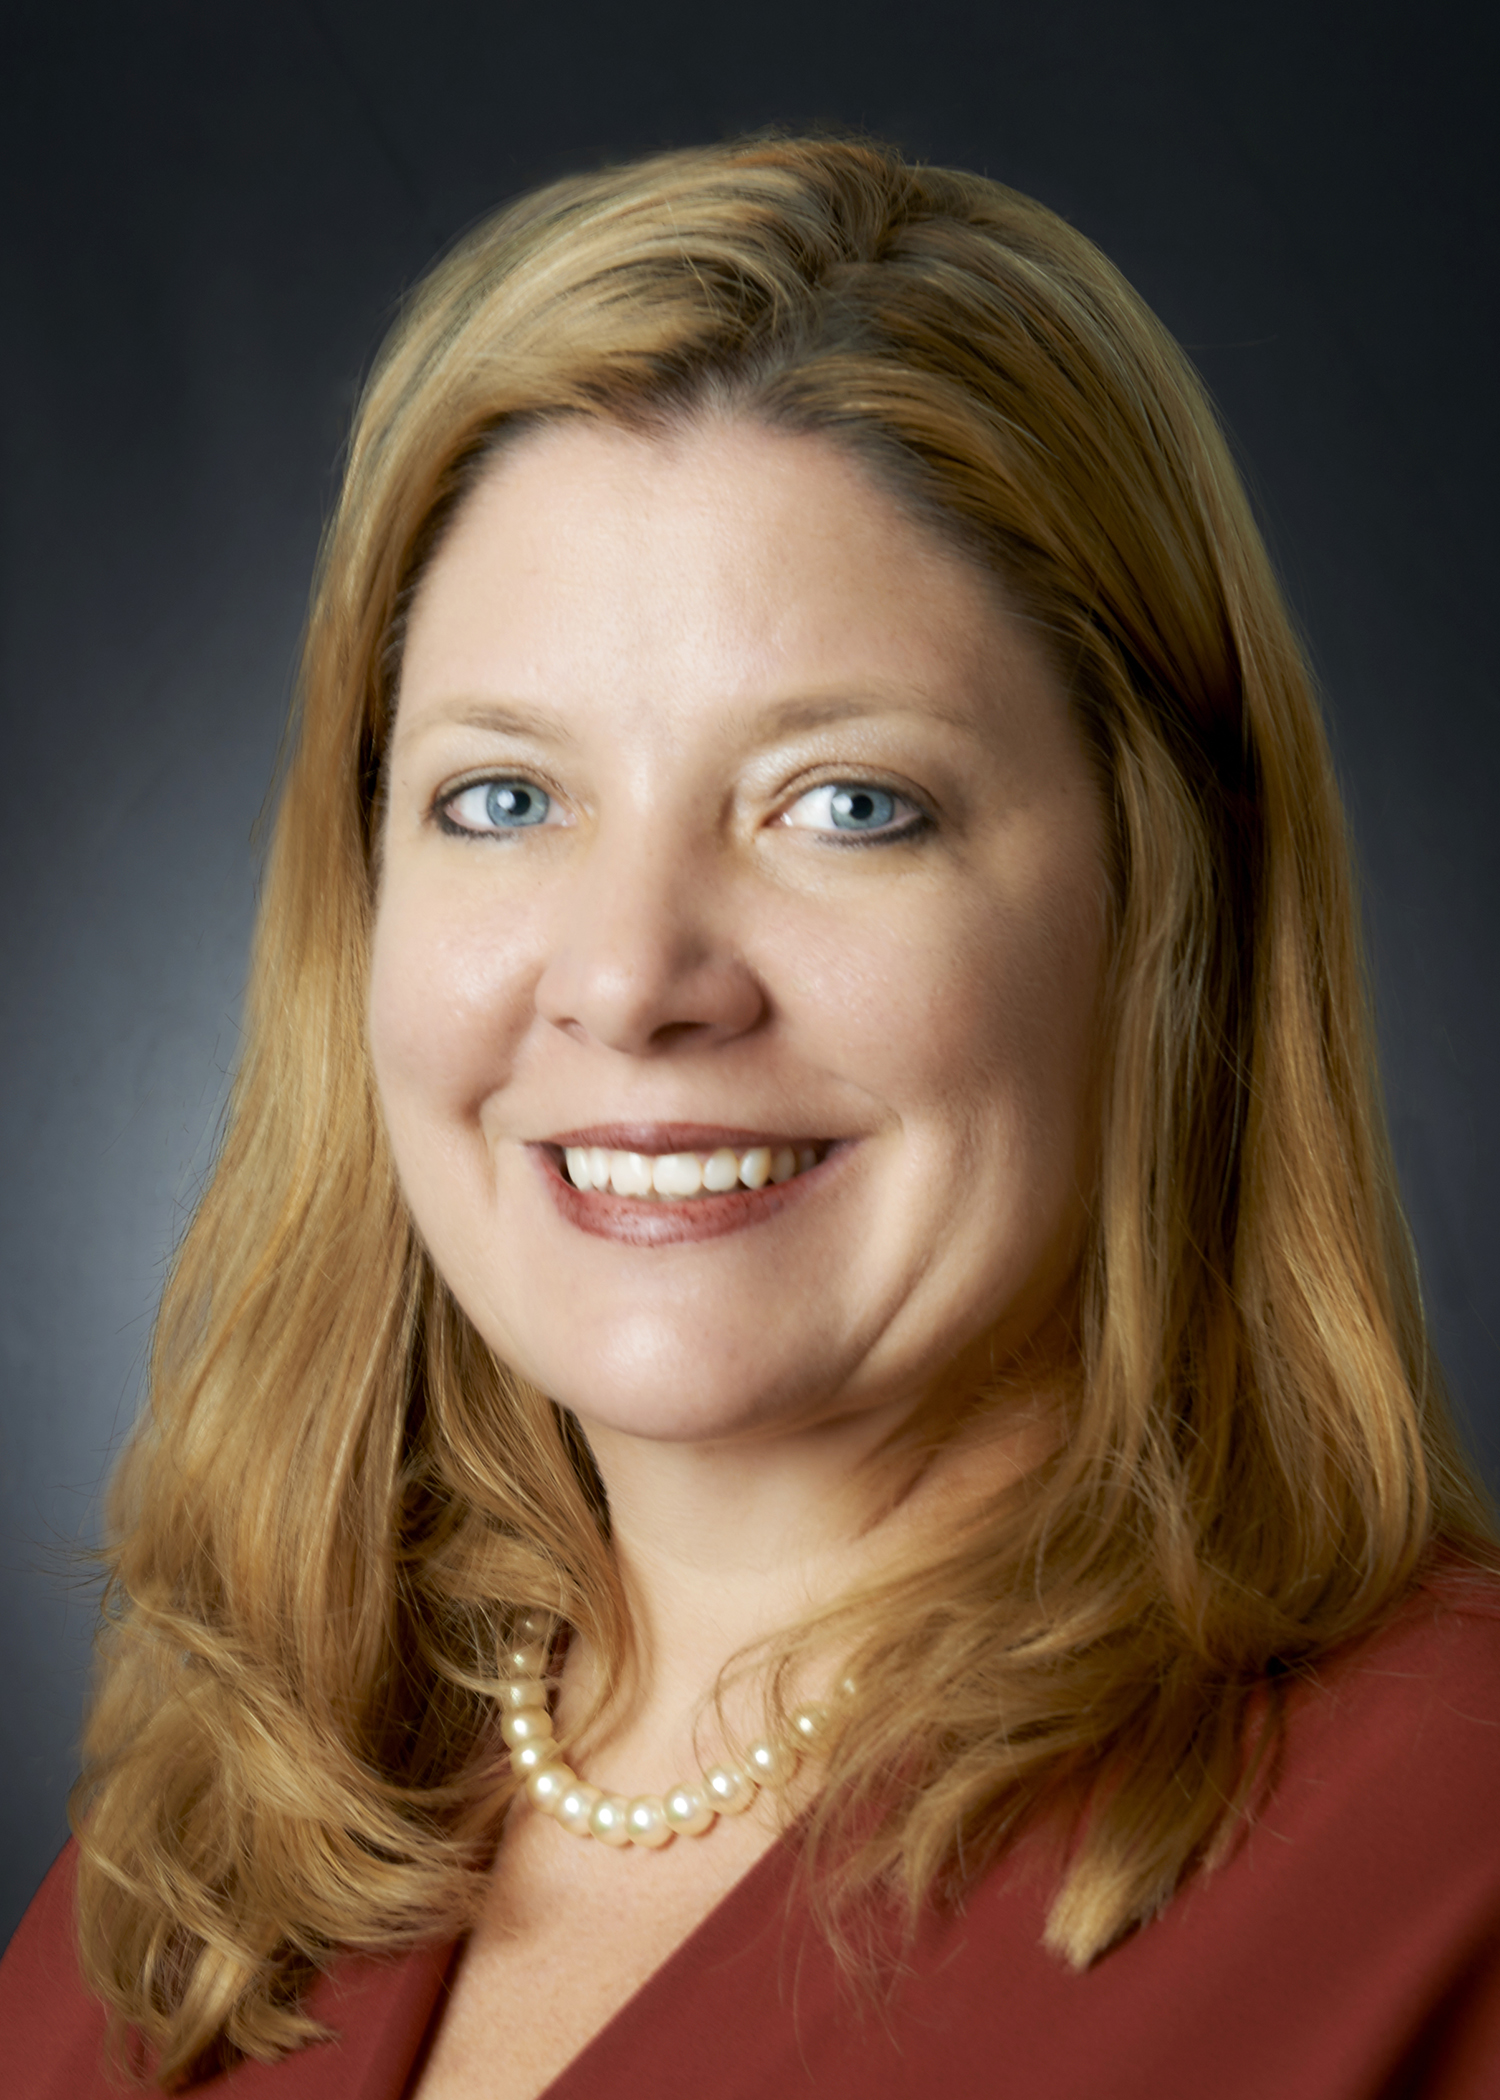 Rhonda Pirvulescu was hired as a Senior Private Banker in Wilmington Trust's New York office.